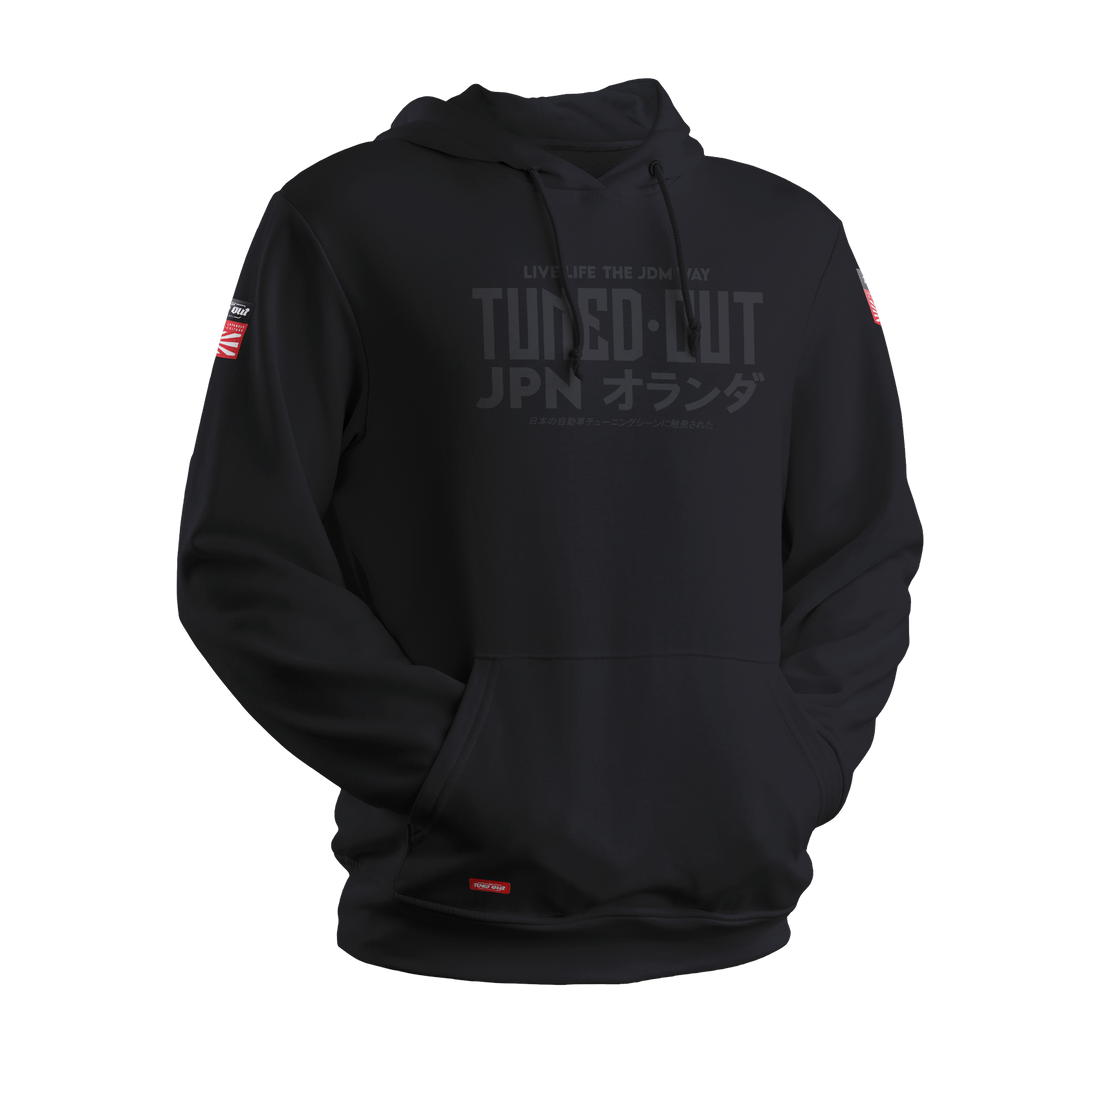 Tuned-Out black on black hoodie